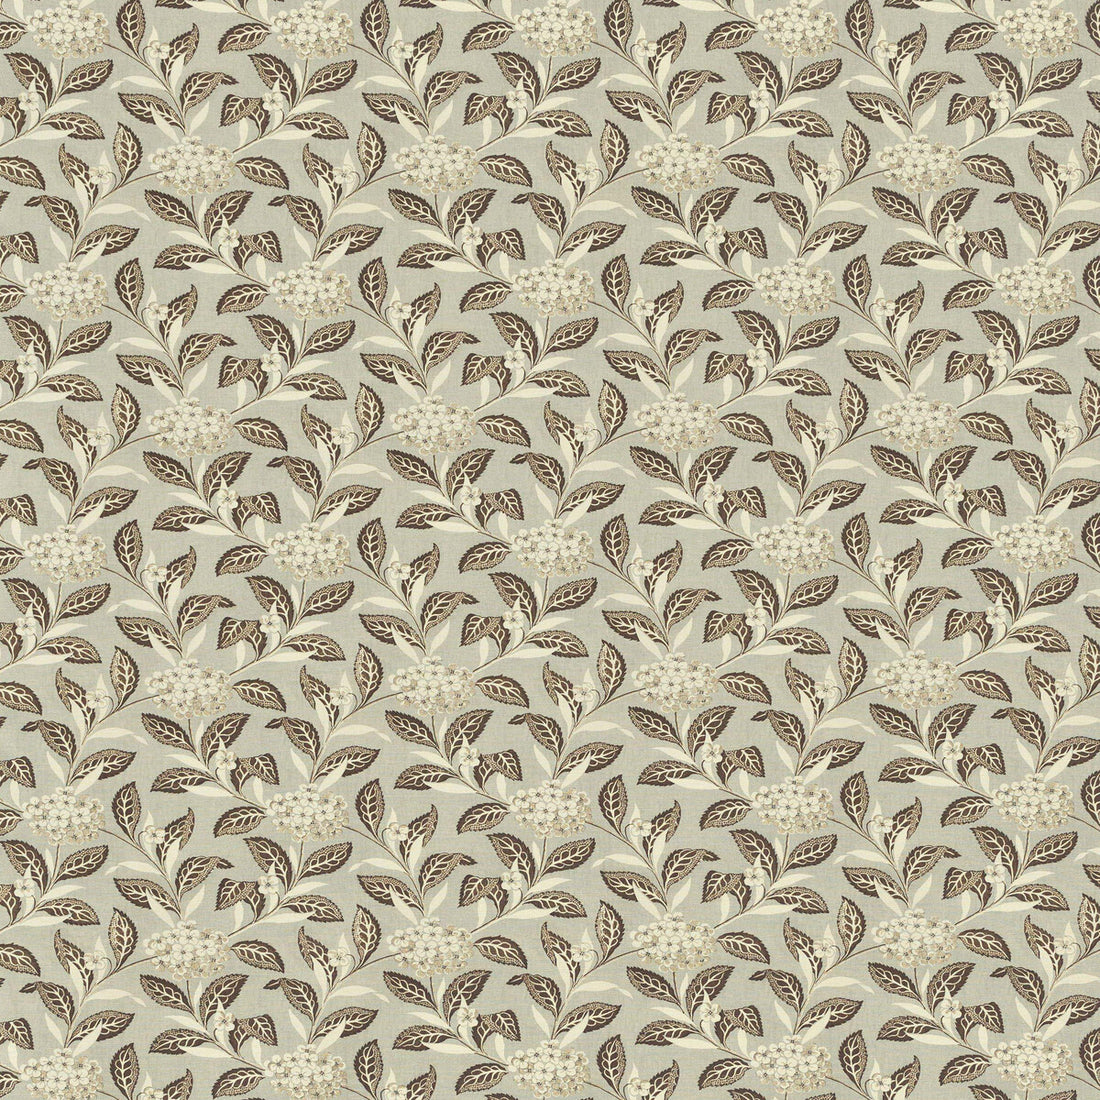 Ortensia fabric in brown on celadon color - pattern 2023133.613.0 - by Lee Jofa in the Paolo Moschino Garden II collection